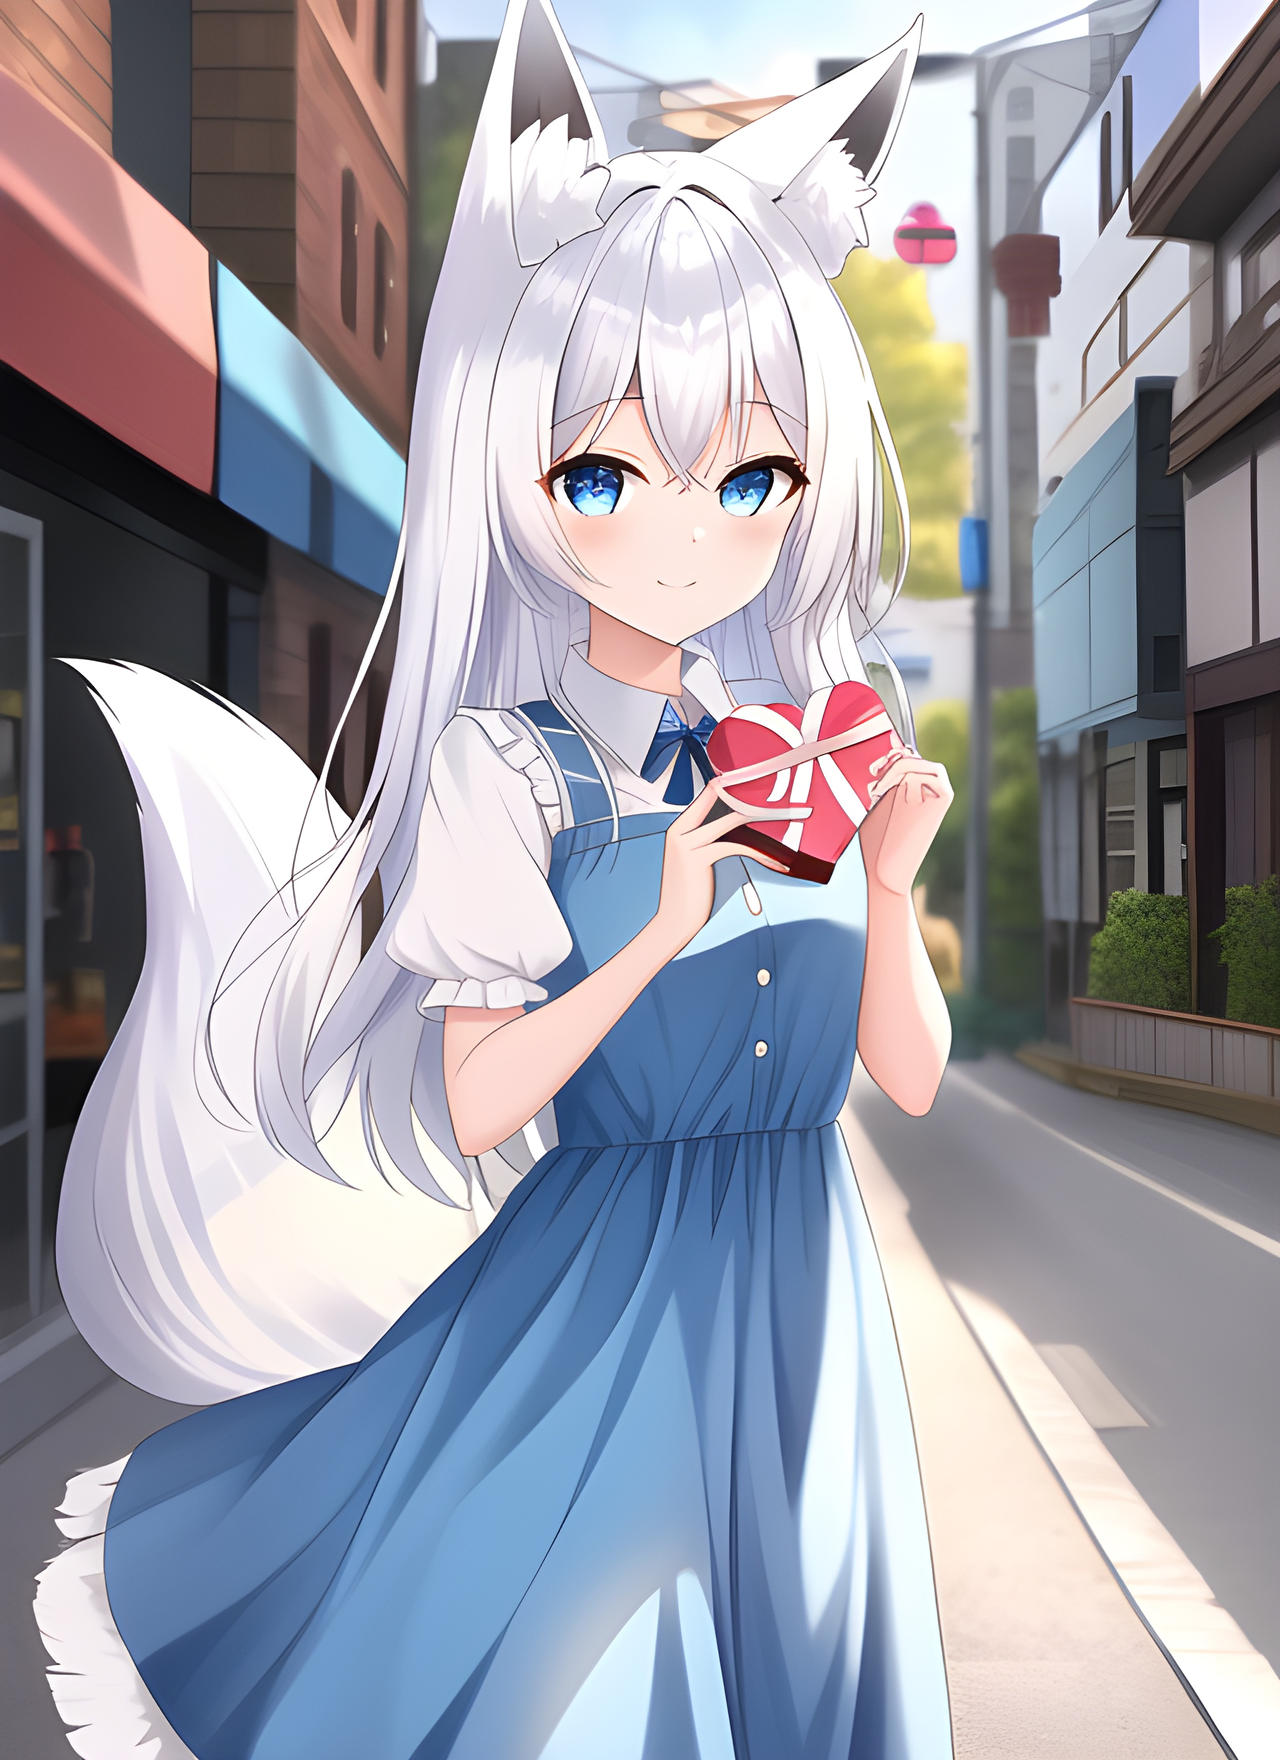 Kitsune gives you chocolate for Valentine's Day by imZigs on DeviantArt